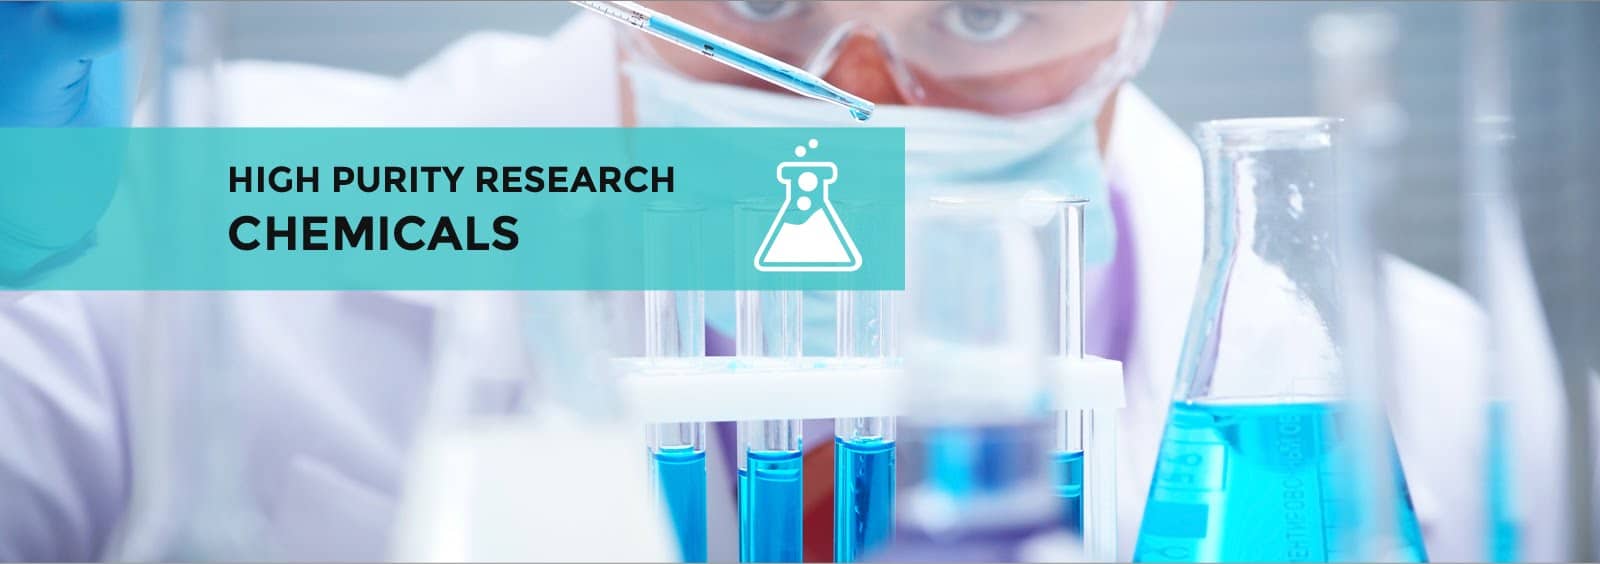 Research chemicals banner